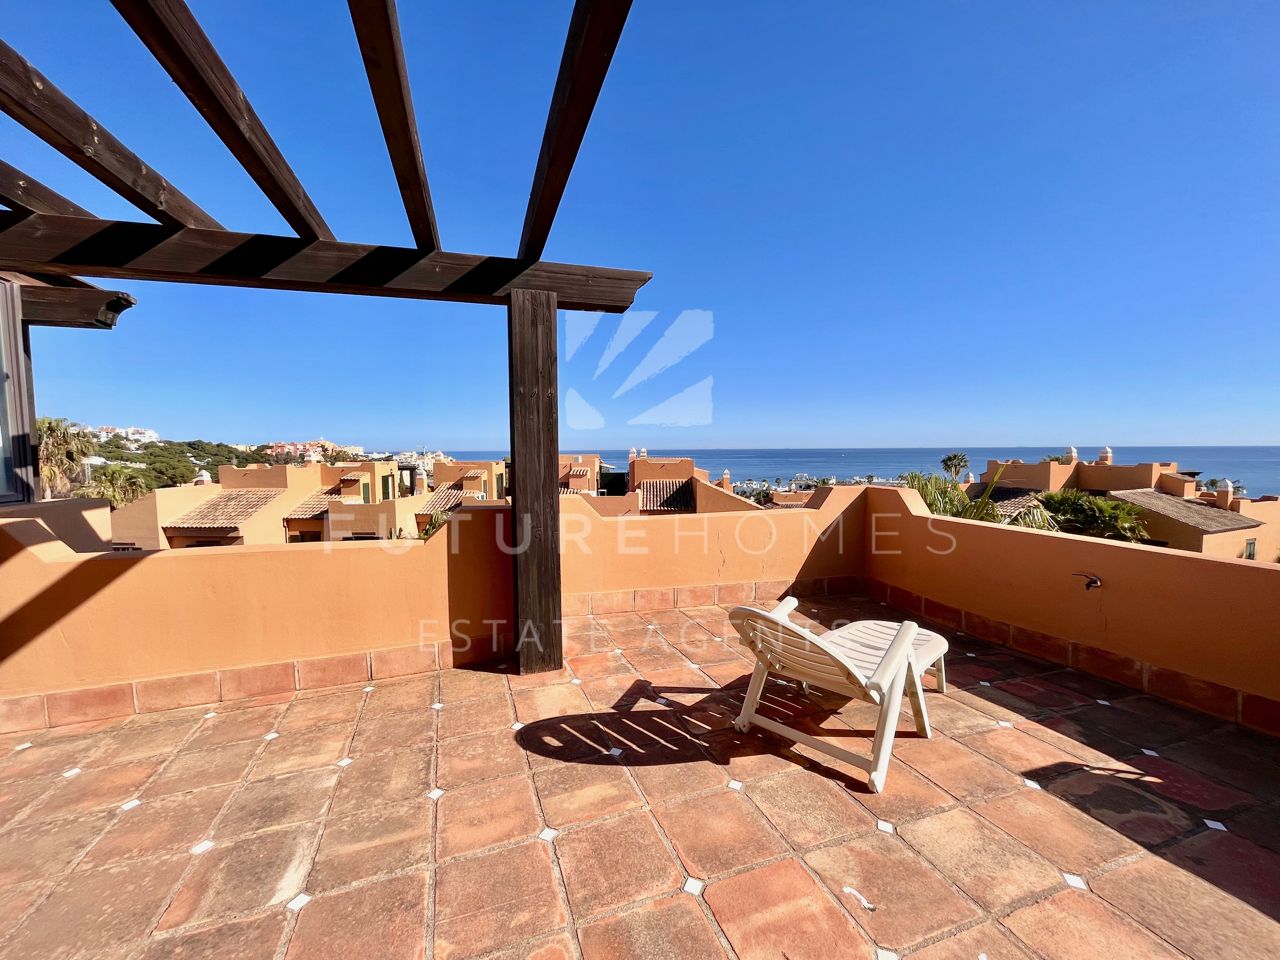 Fantastic corner townhouse for sale in the highly sought after area of Seghers, Estepona